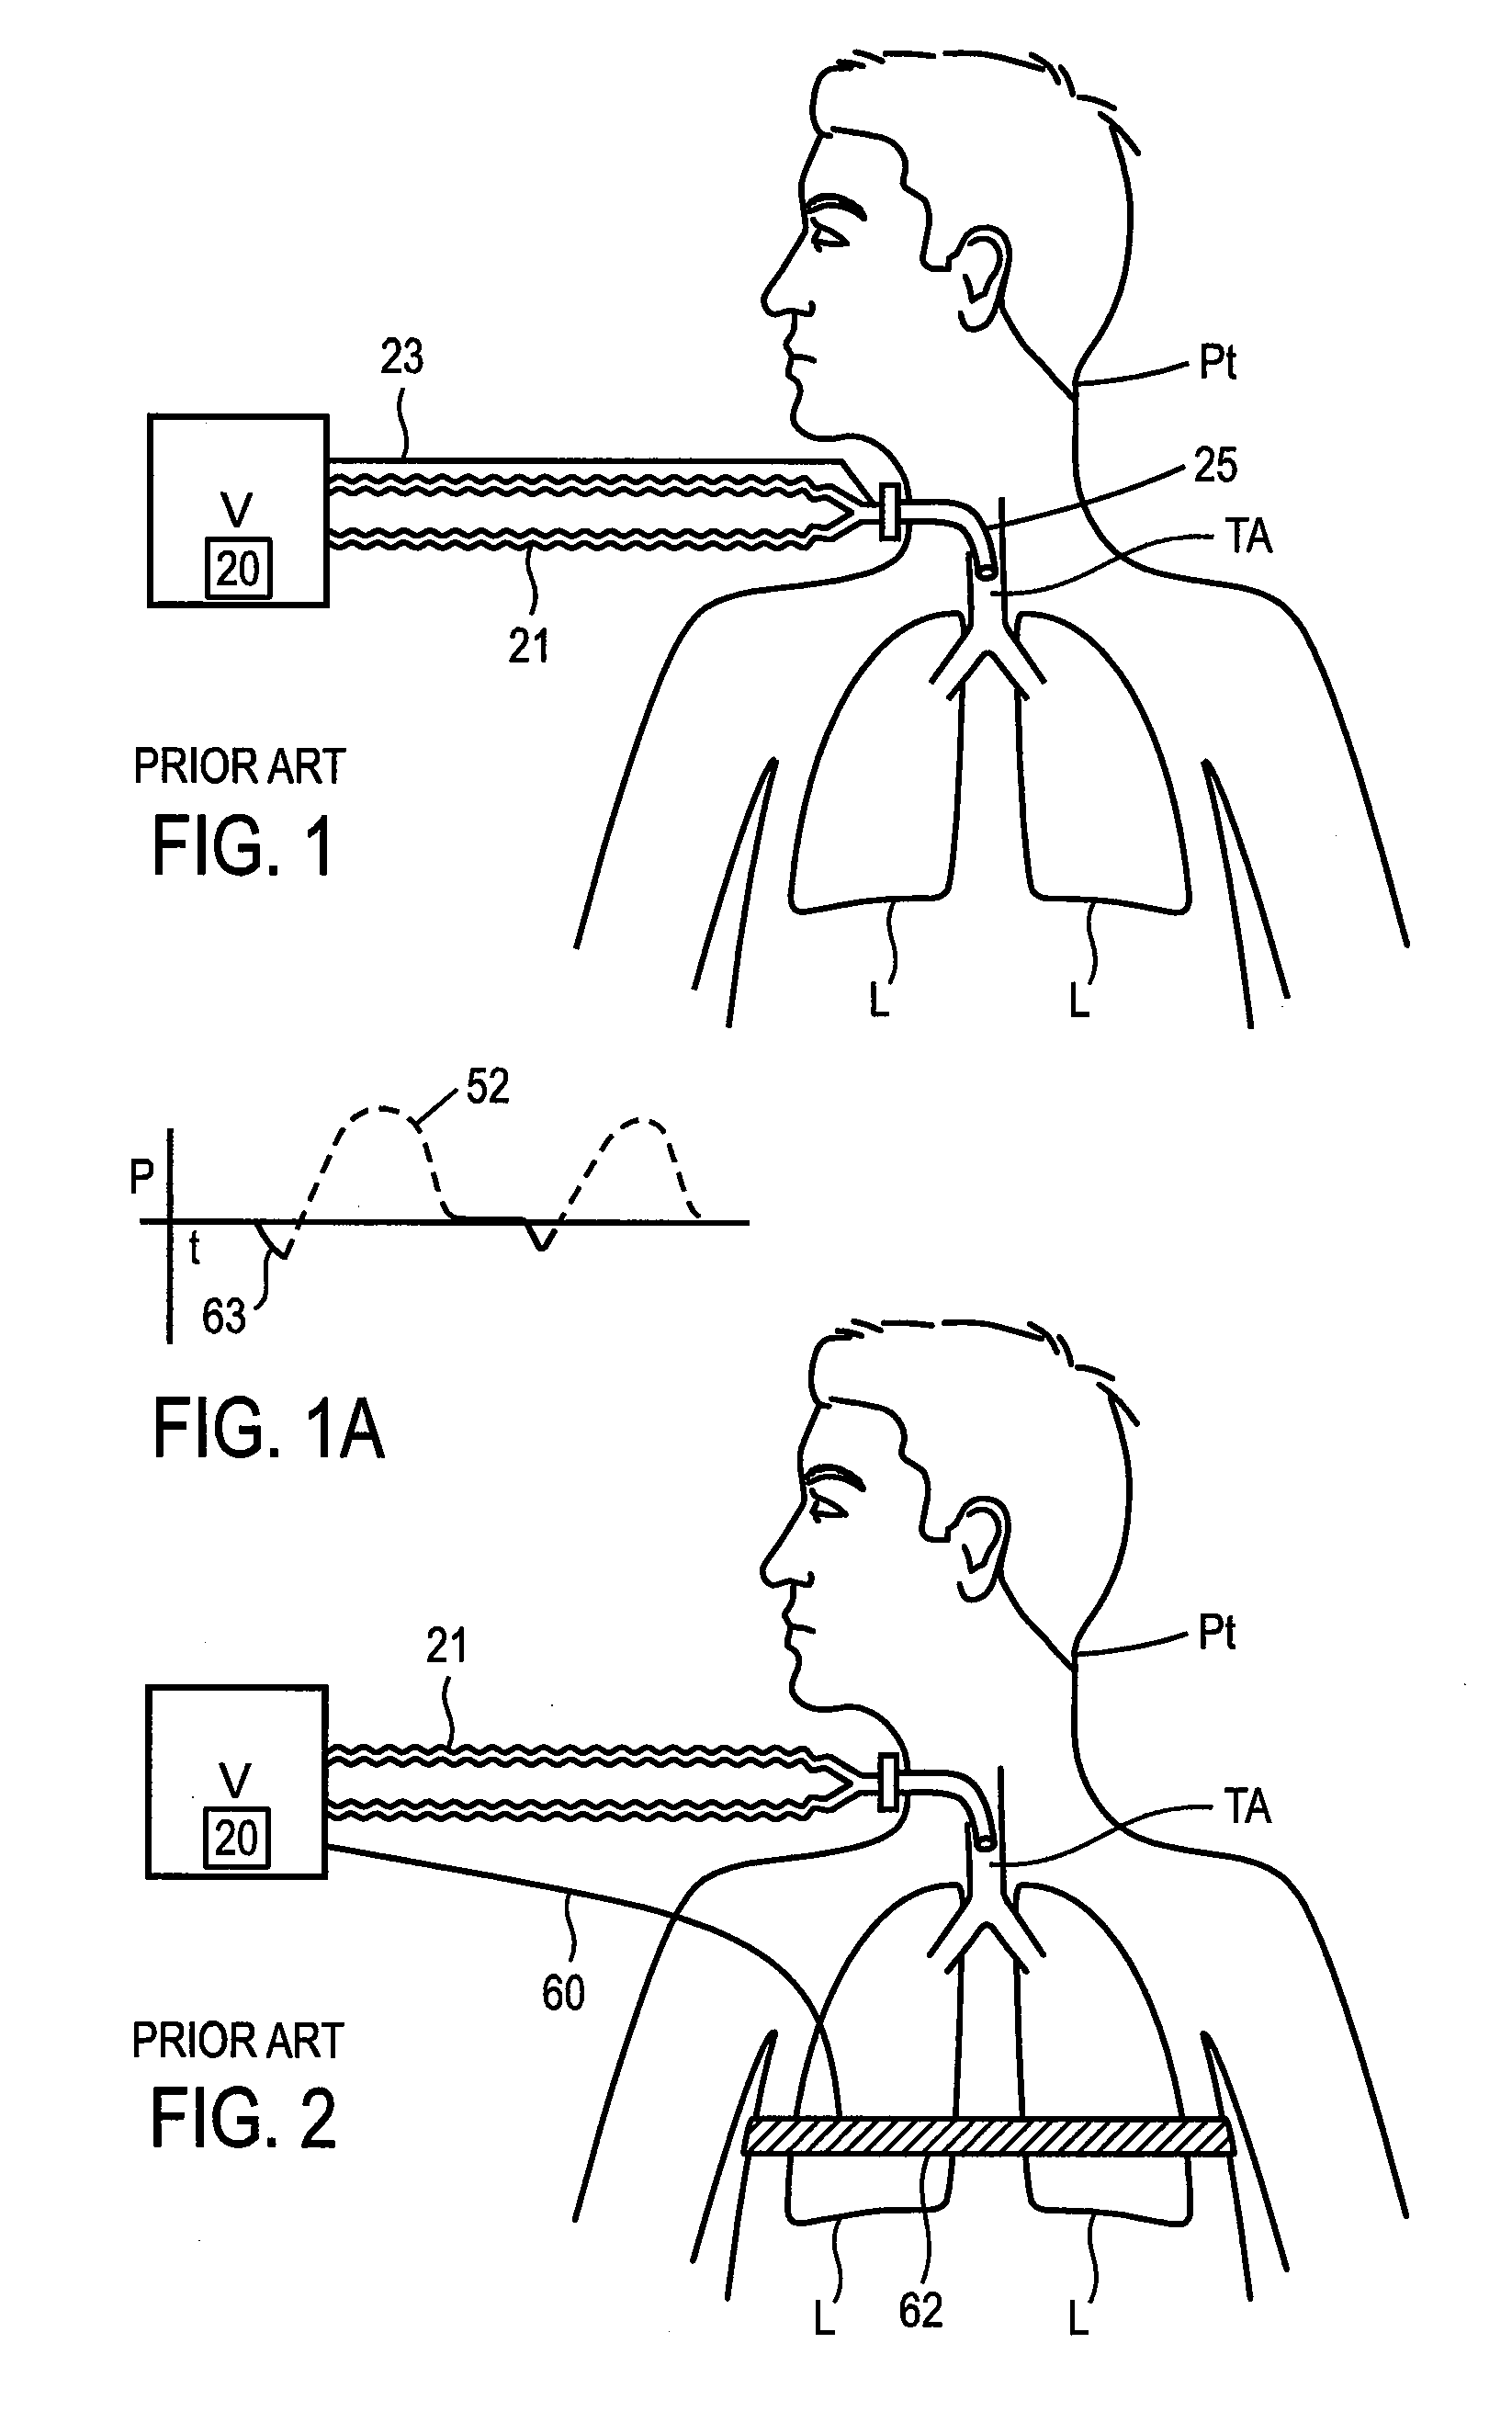 Methods and devices for sensing respiration and controlling ventilator functions